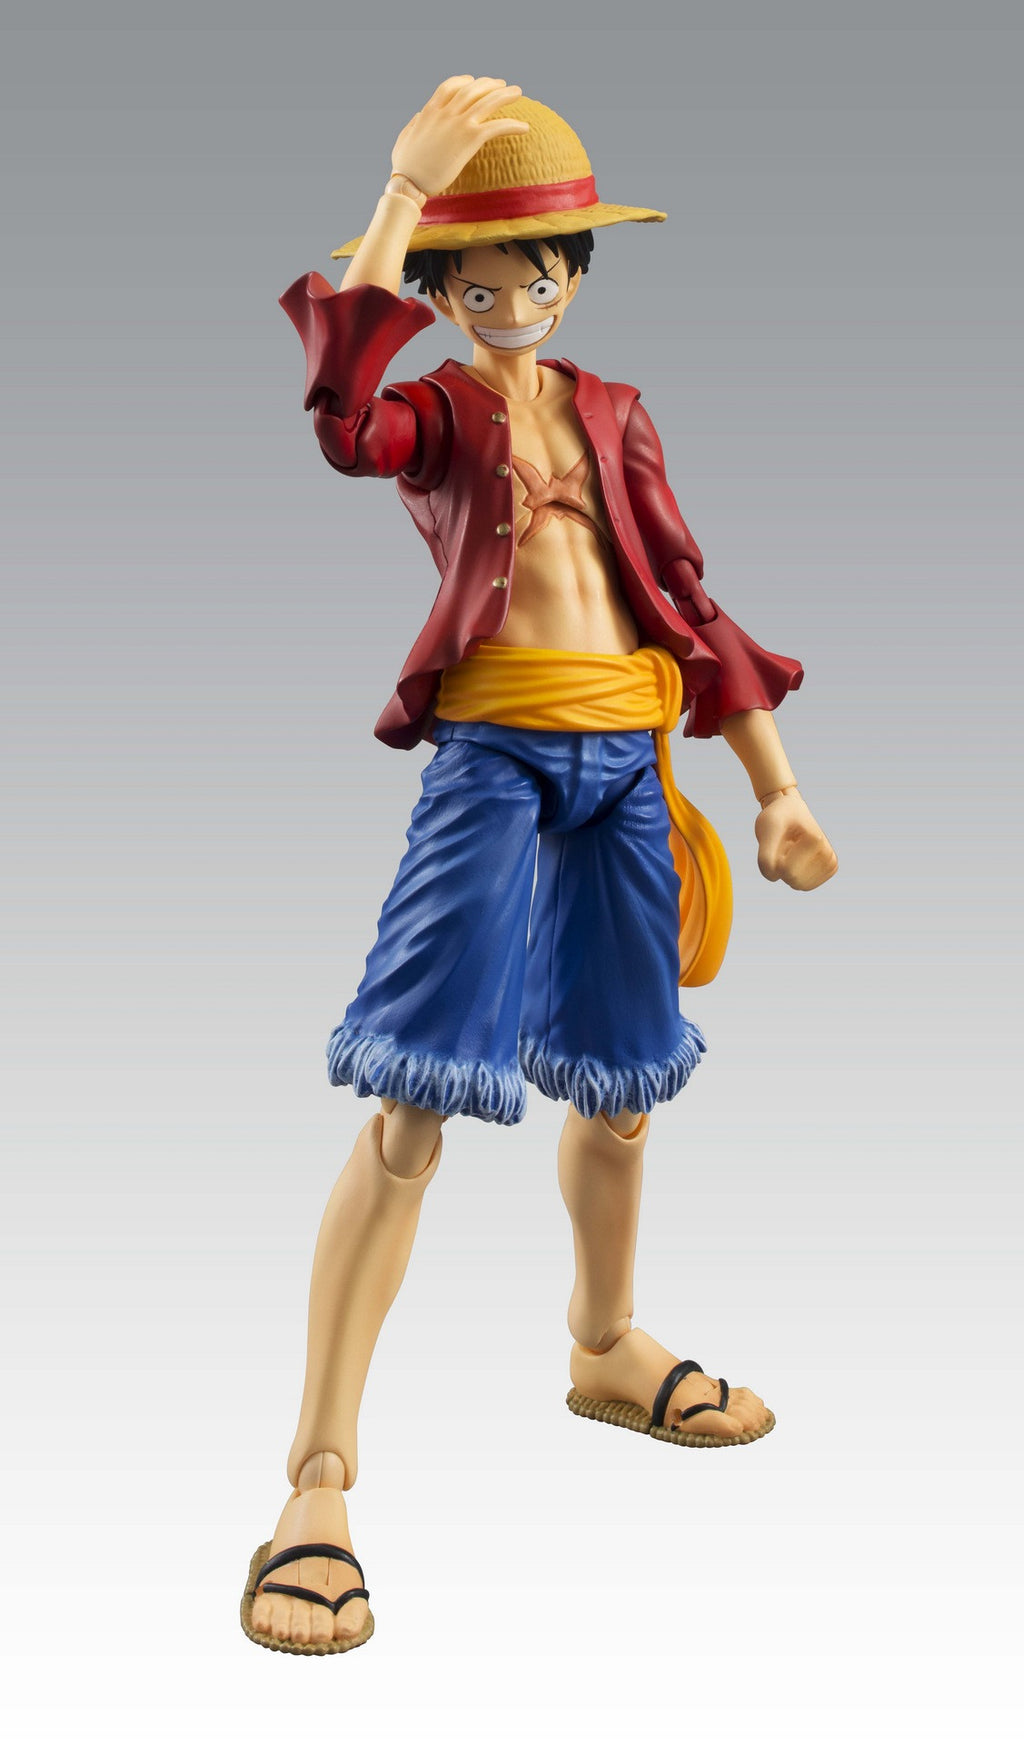 Bandai's ONE PIECE IMAGINATION WORKS 1/9 Monkey D. Luffy (Unboxing/Poses/Comparison)  - YouTube